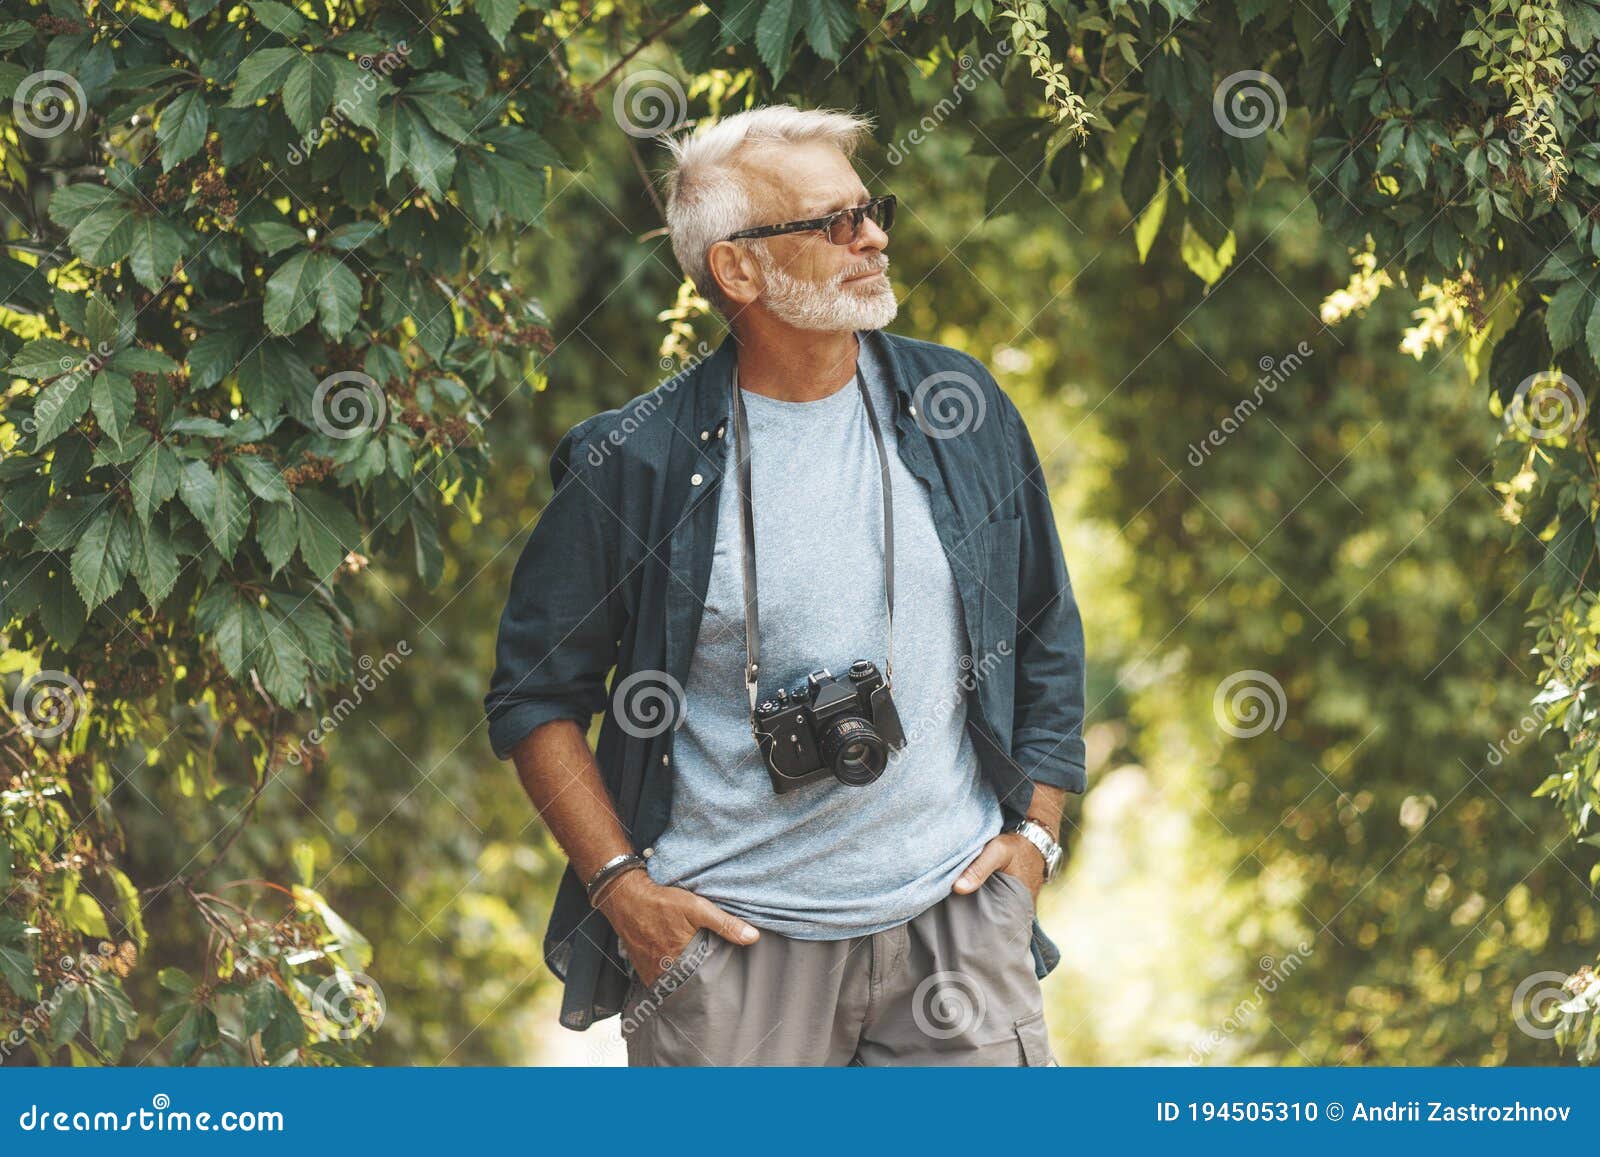 a mature man with a beard walks in the park with a camera. active pastime in old age